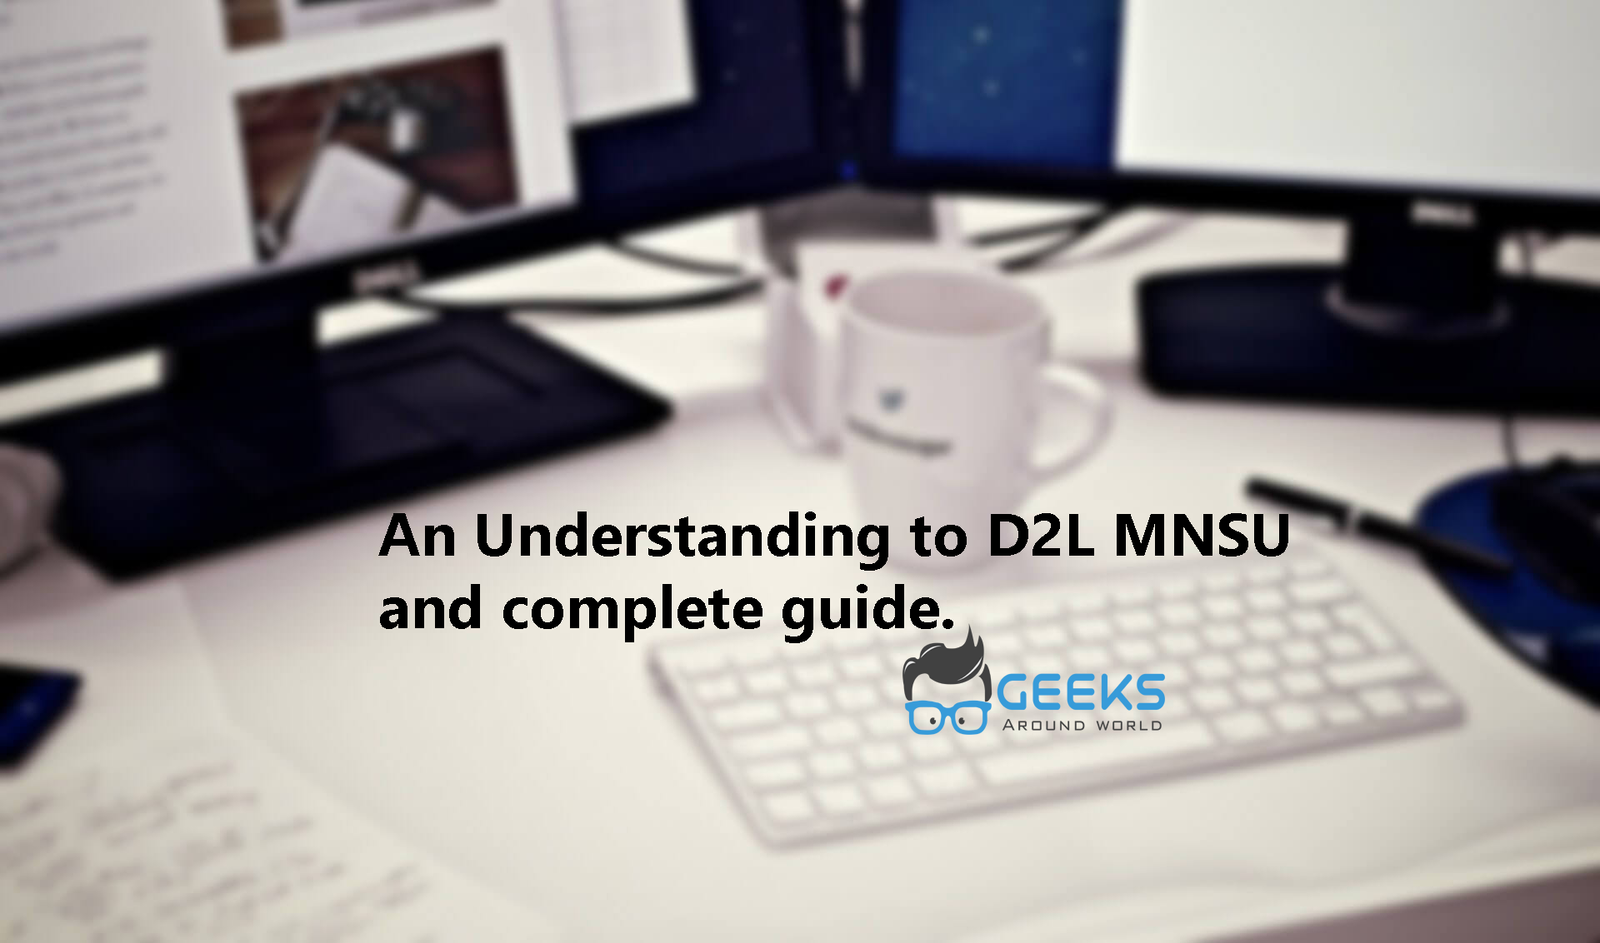 An Understanding to D2L MNSU and complete guide.